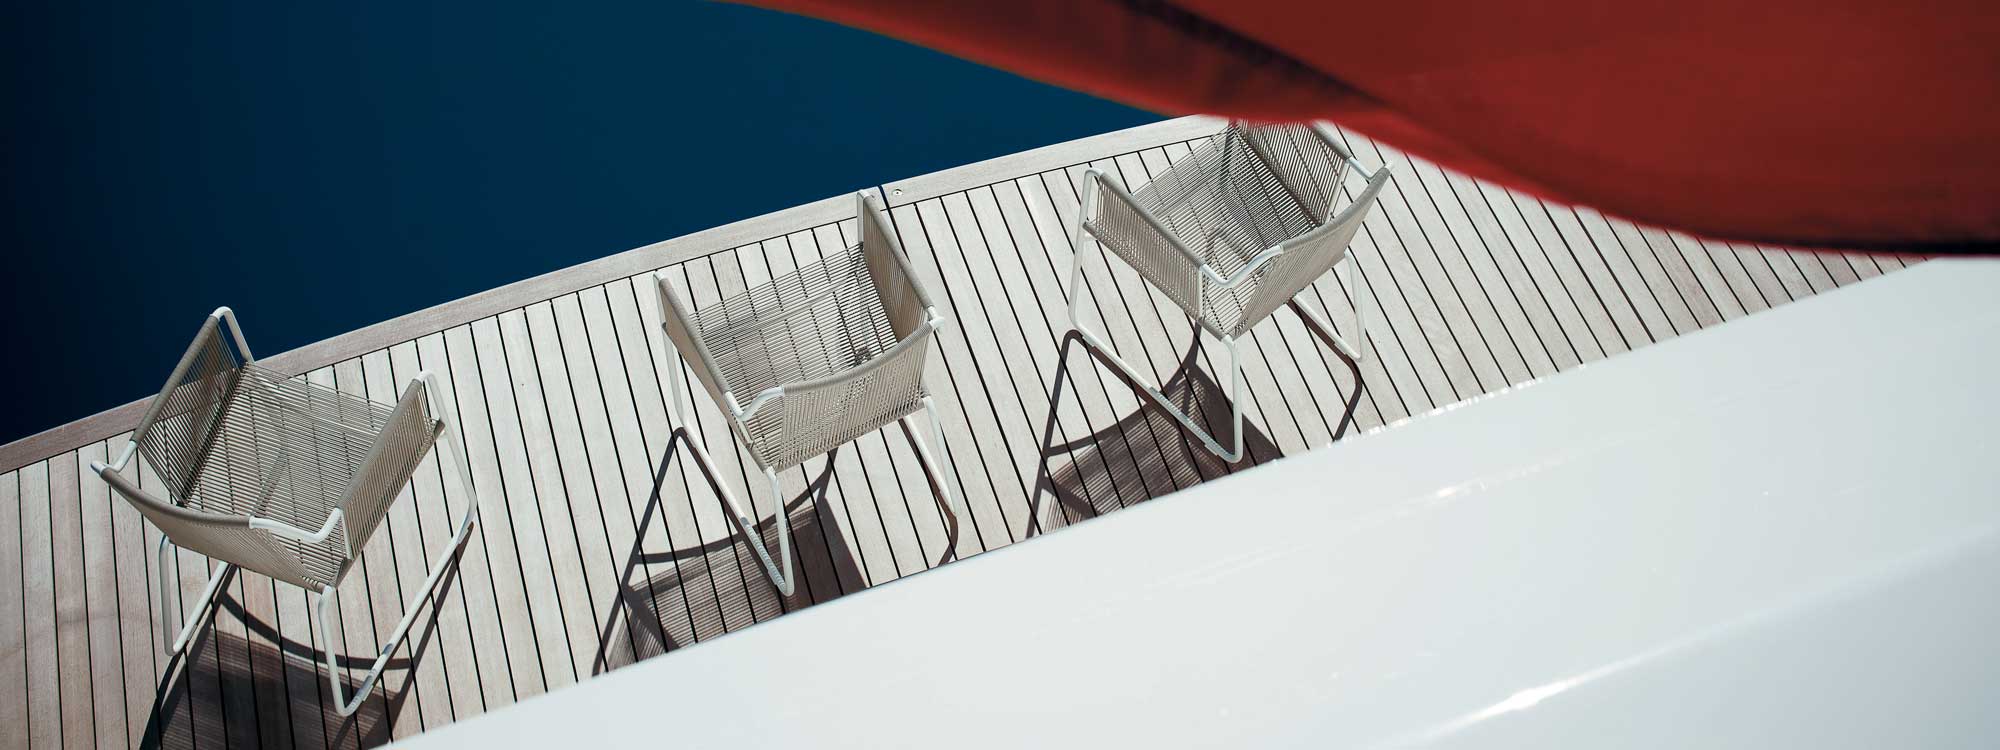 Image of 3 RODA Harp outdoor carver chairs with White frames and Sand cord, shown on decking by azure swimming pool